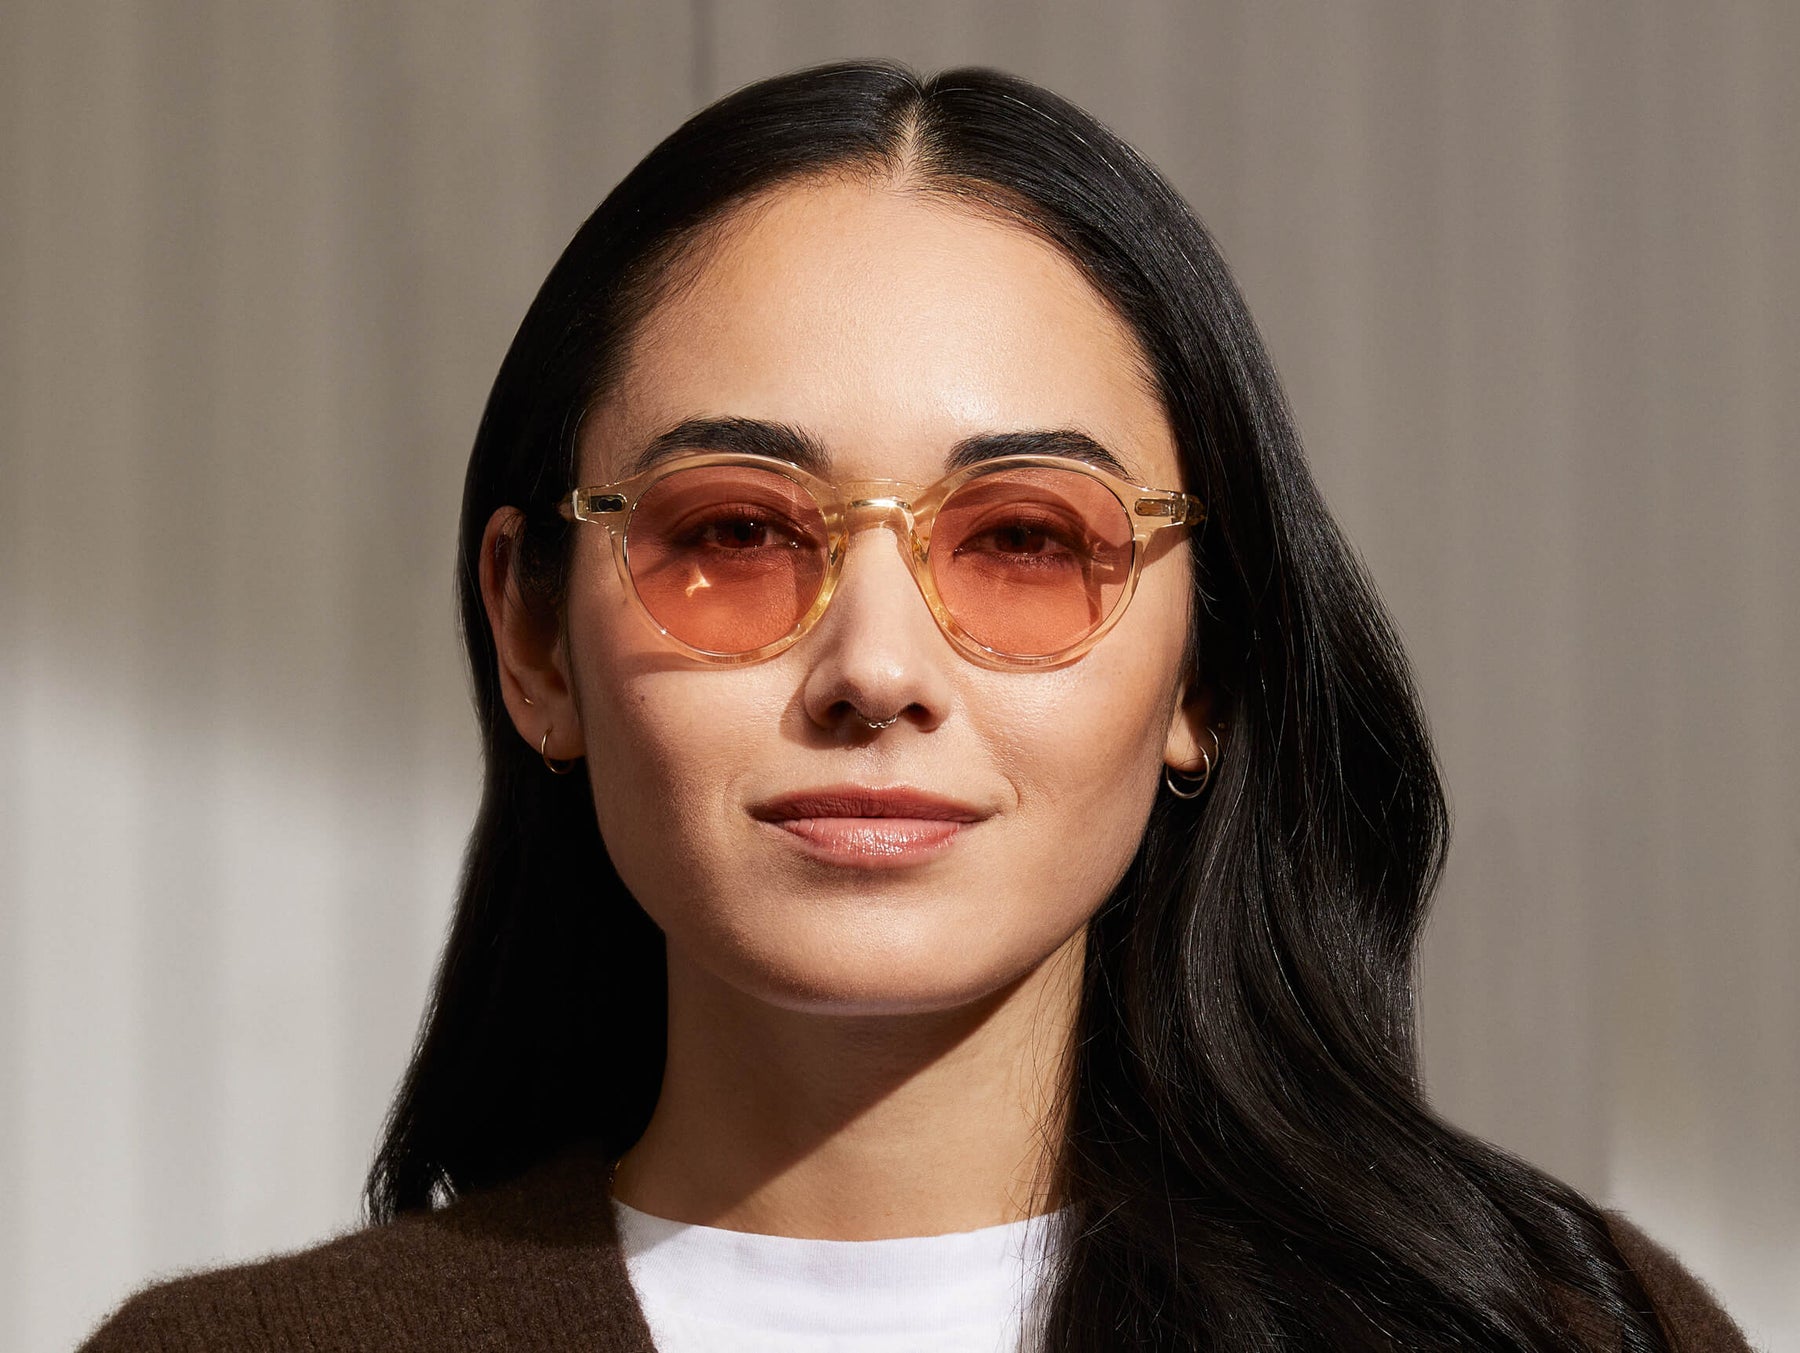 Model is wearing The MILTZEN in Flesh in size 46 with New York Rose Tinted Lenses